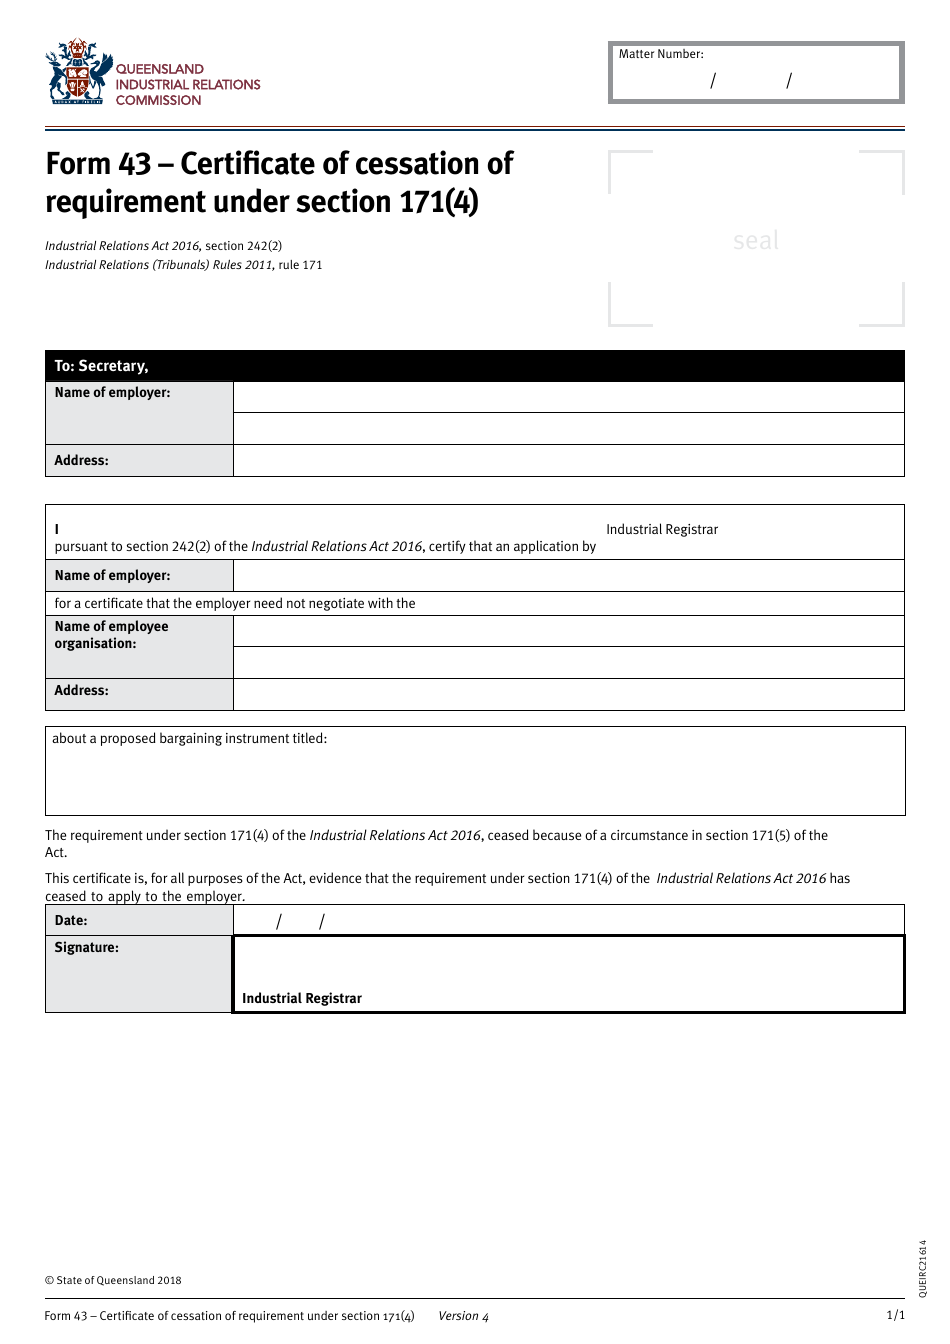 Form 43 Certificate of Cessation of Requirement Under Section 171(4) - Queensland, Australia, Page 1